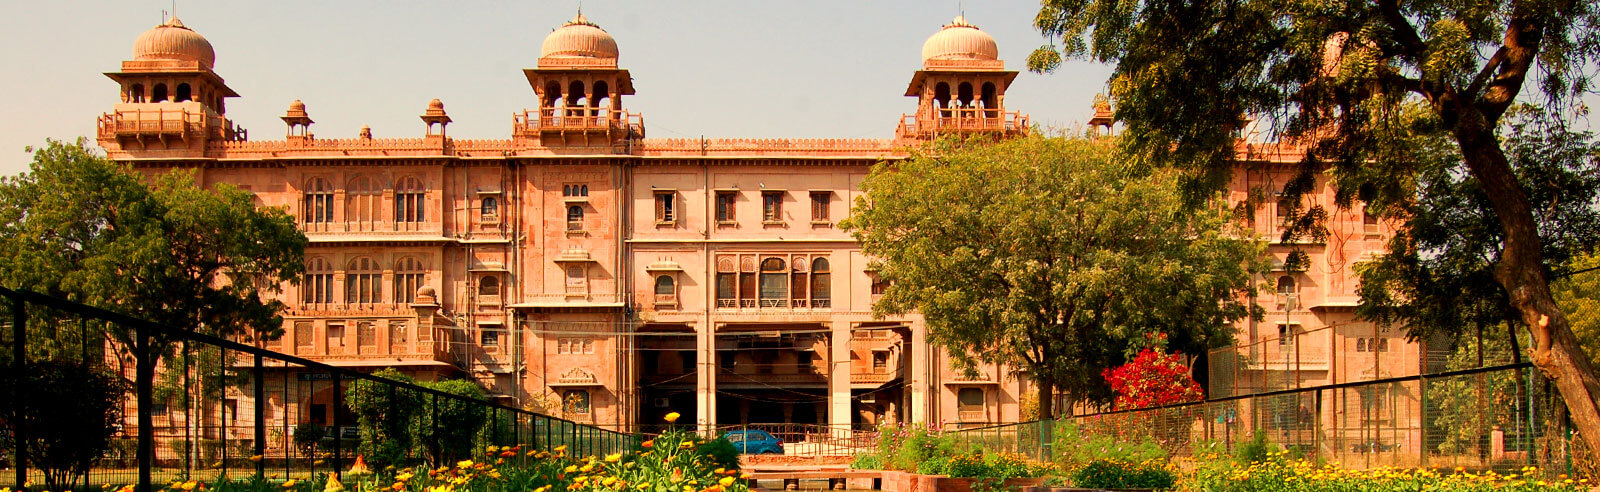 Rajasthan University of Veterinary & Animal Sciences Fee Structure